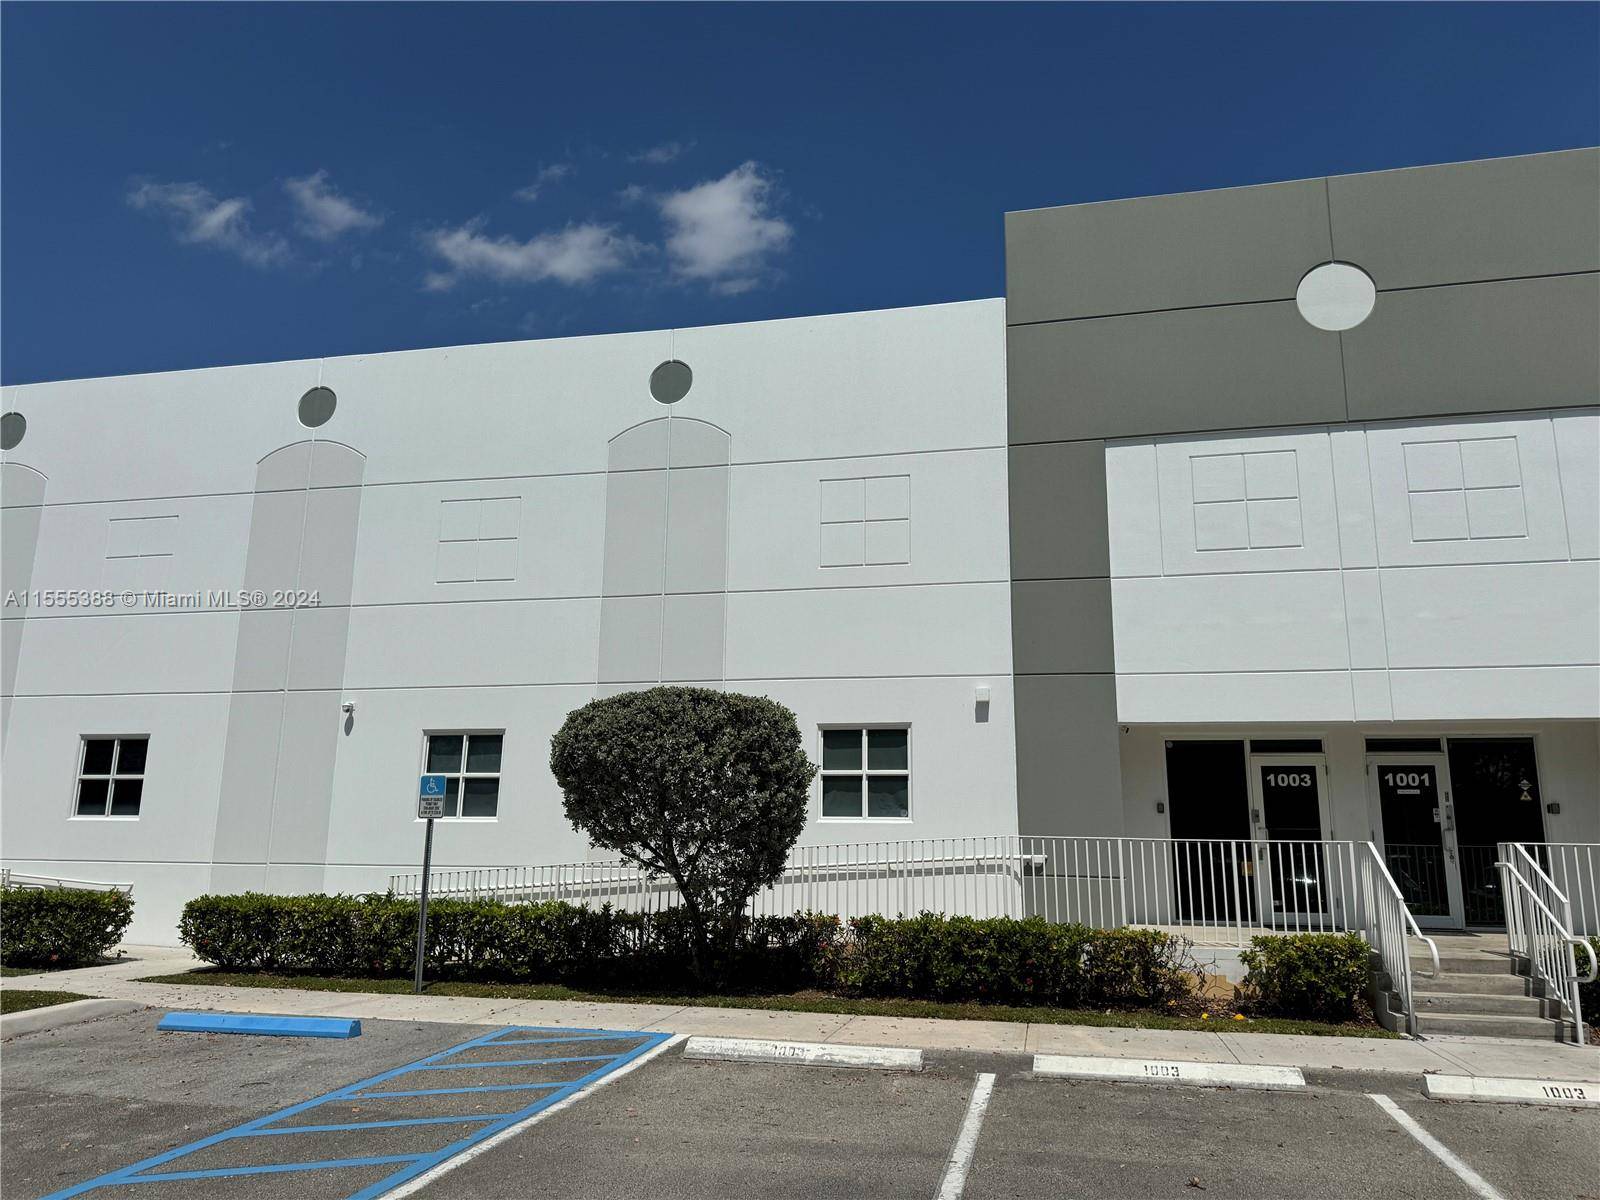 FOR LEASE 8, 250 SF Distribution Office Warehouse Space in Park Centre Business Park.